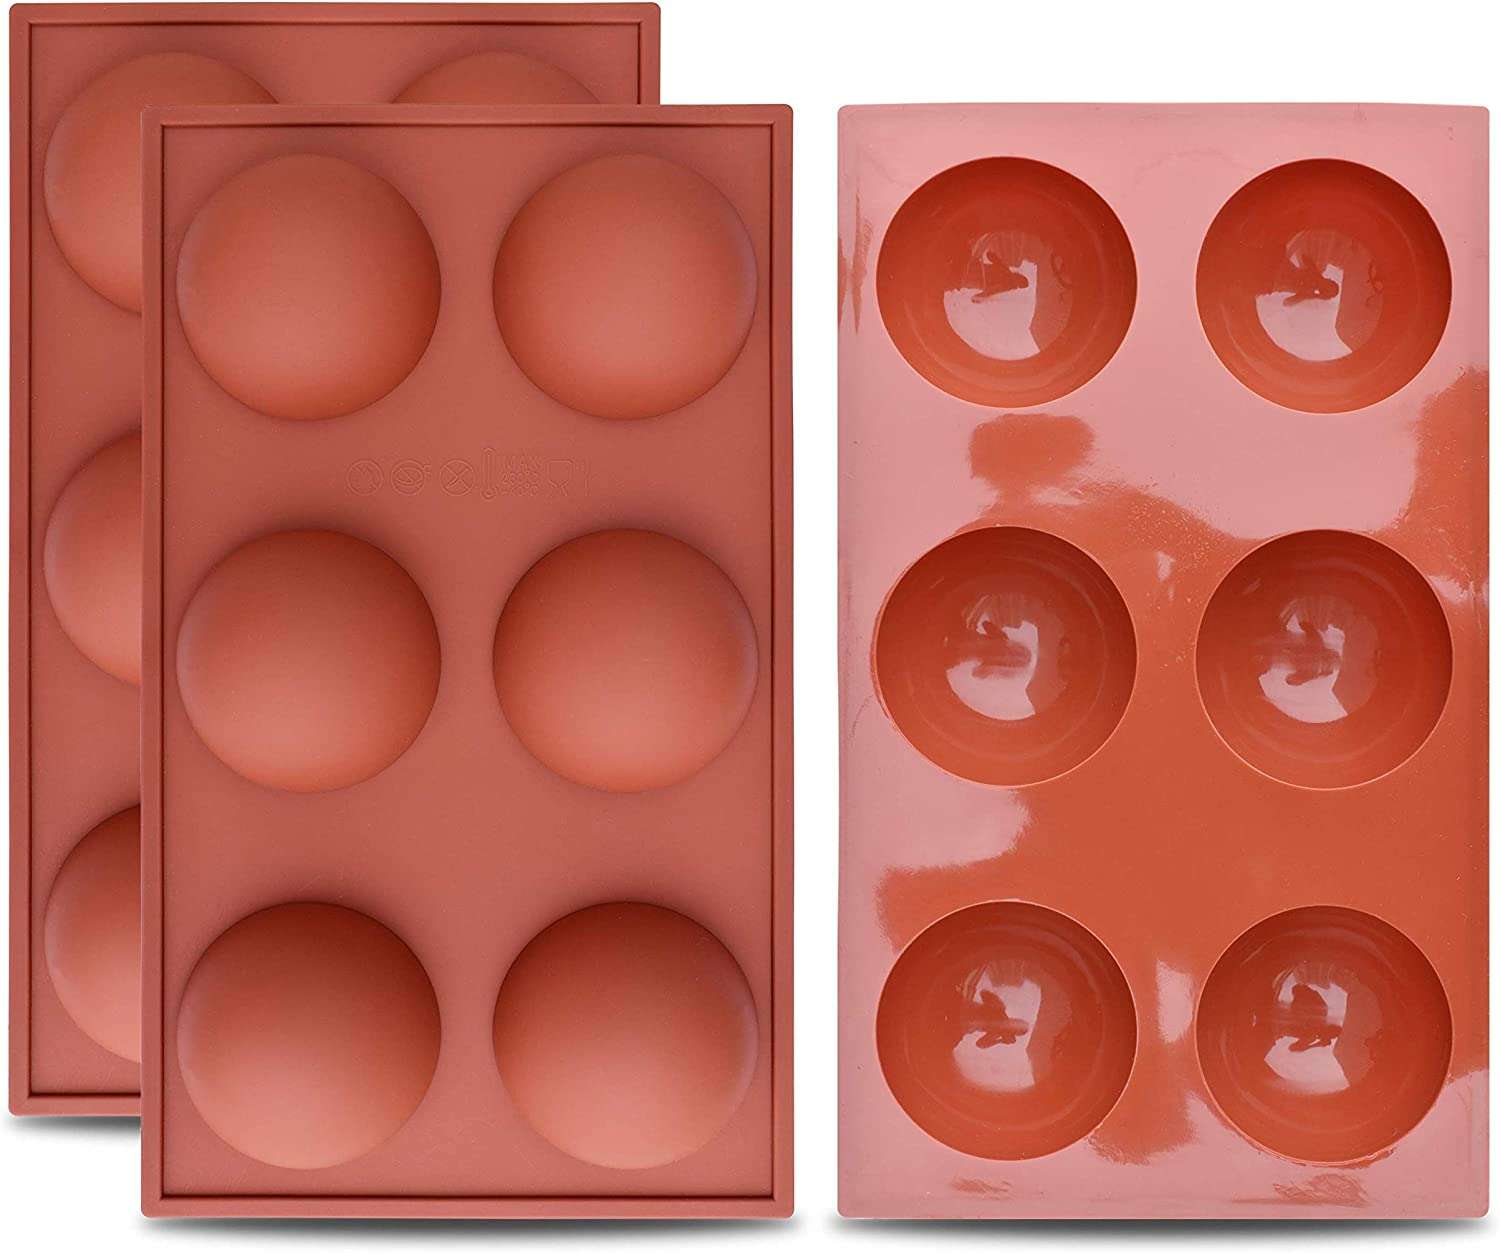 8. HomEdge Candy & Chocolate Mold